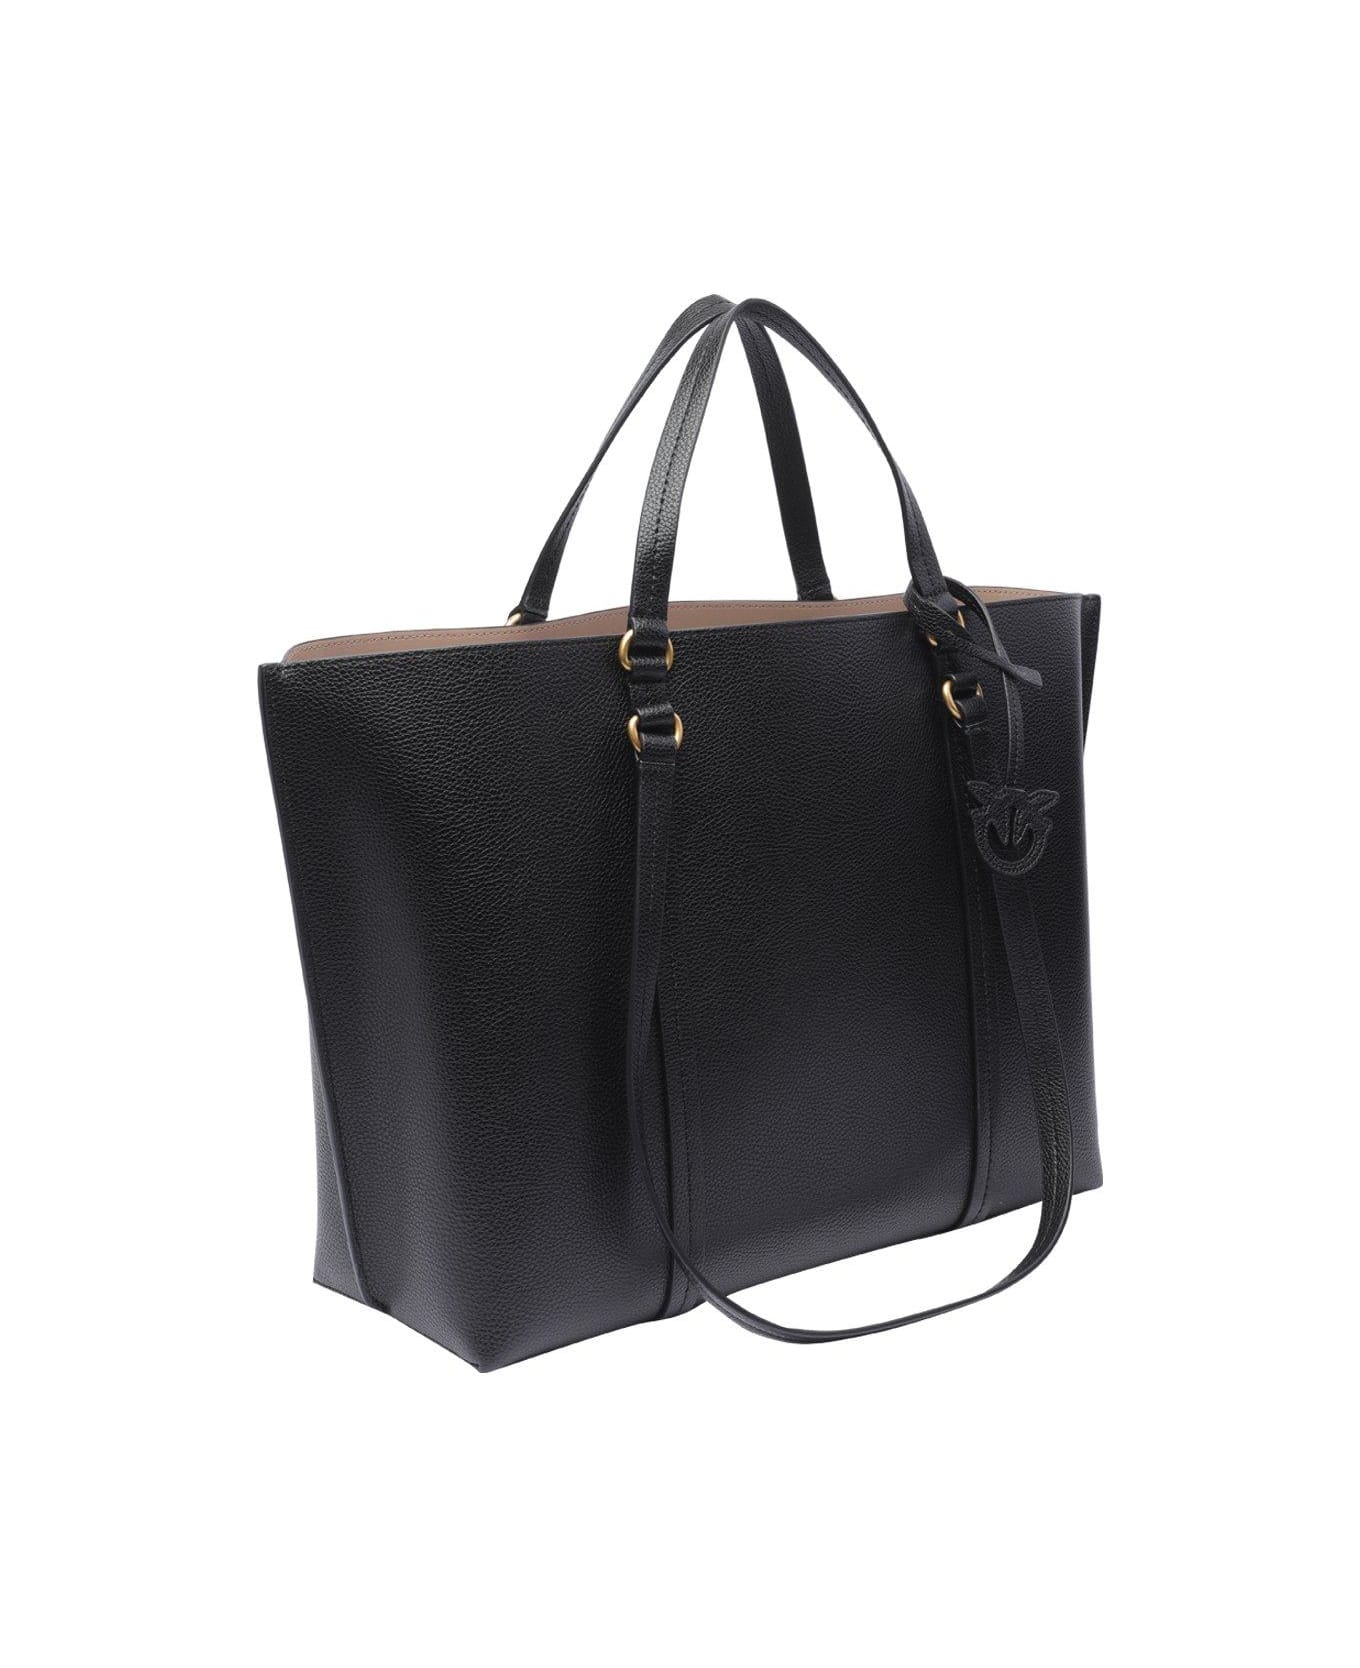 Pinko Carrie Large Tote Bag - Black トートバッグ